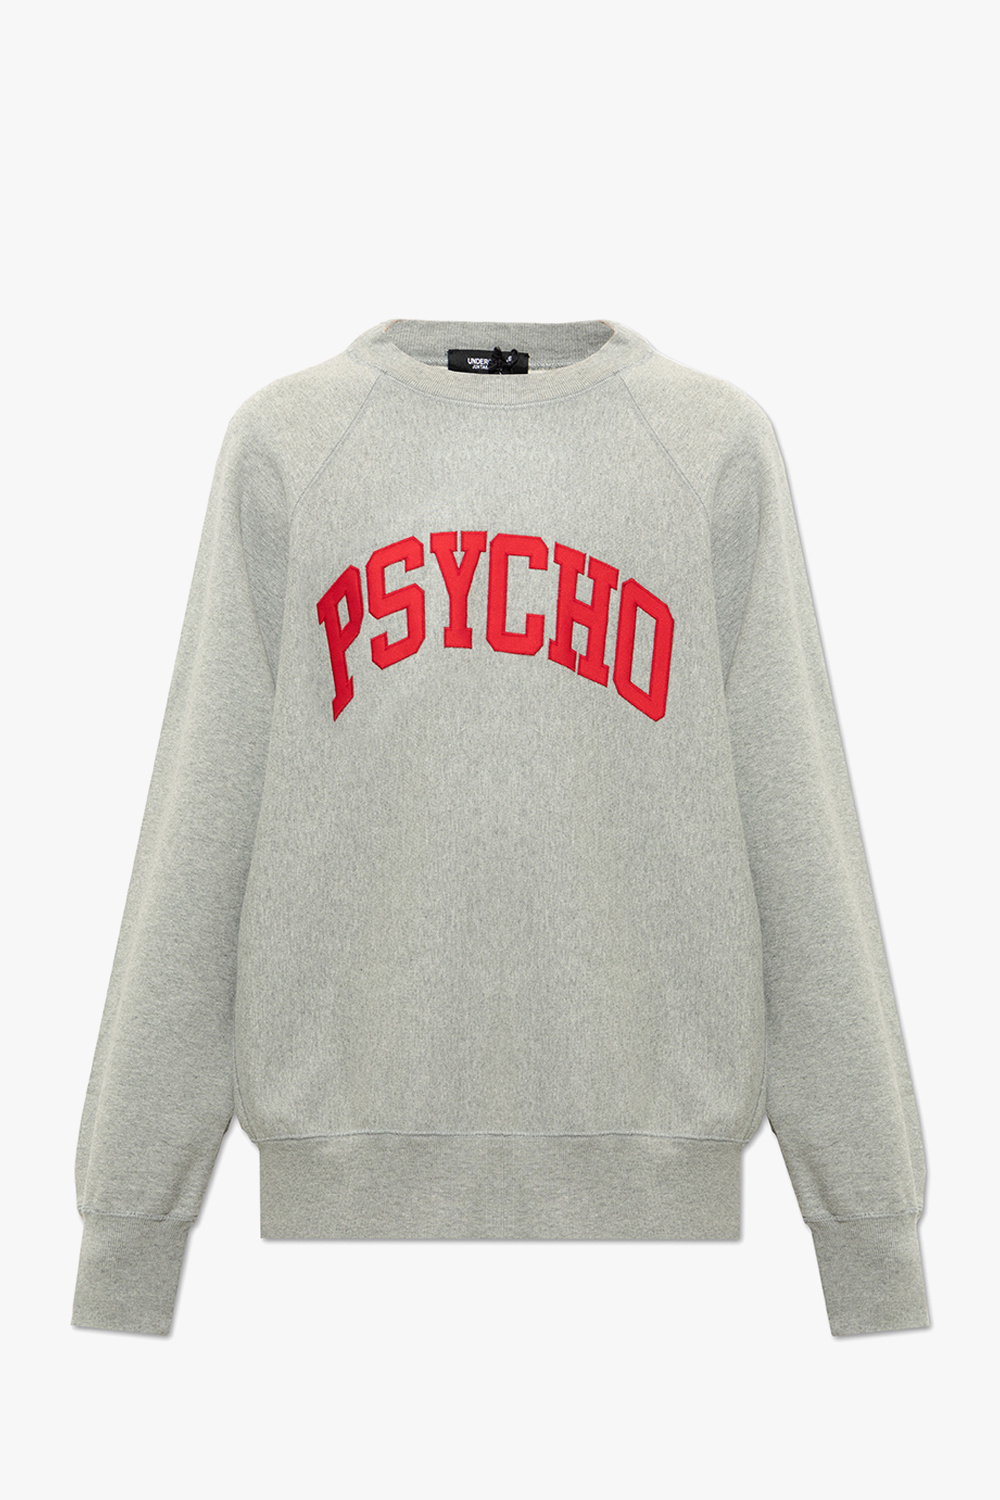 Undercover sweatshirt Shirt with lettering